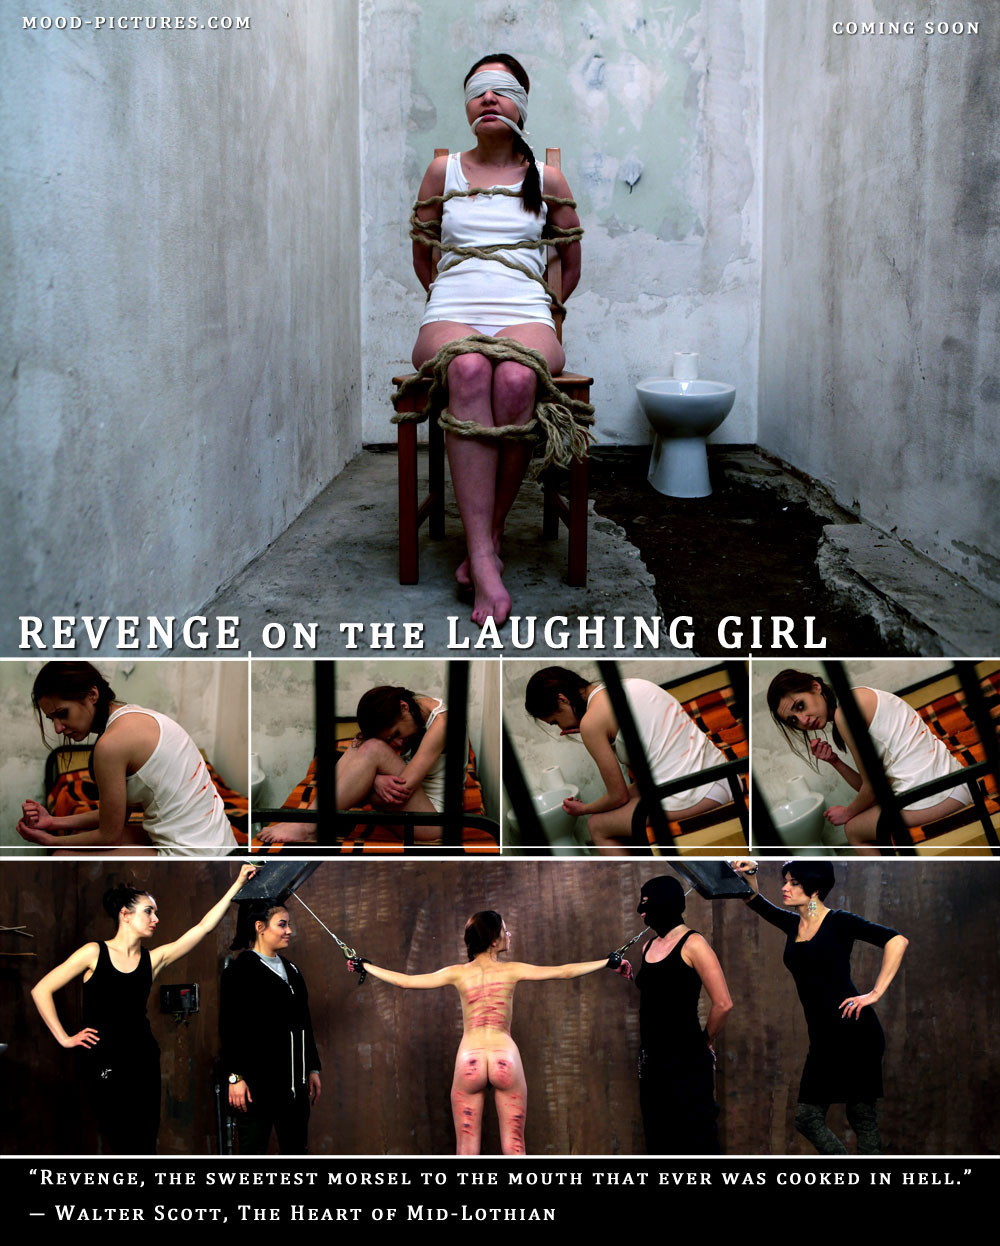 Revenge on the laughing girl spanking reality show #75135181